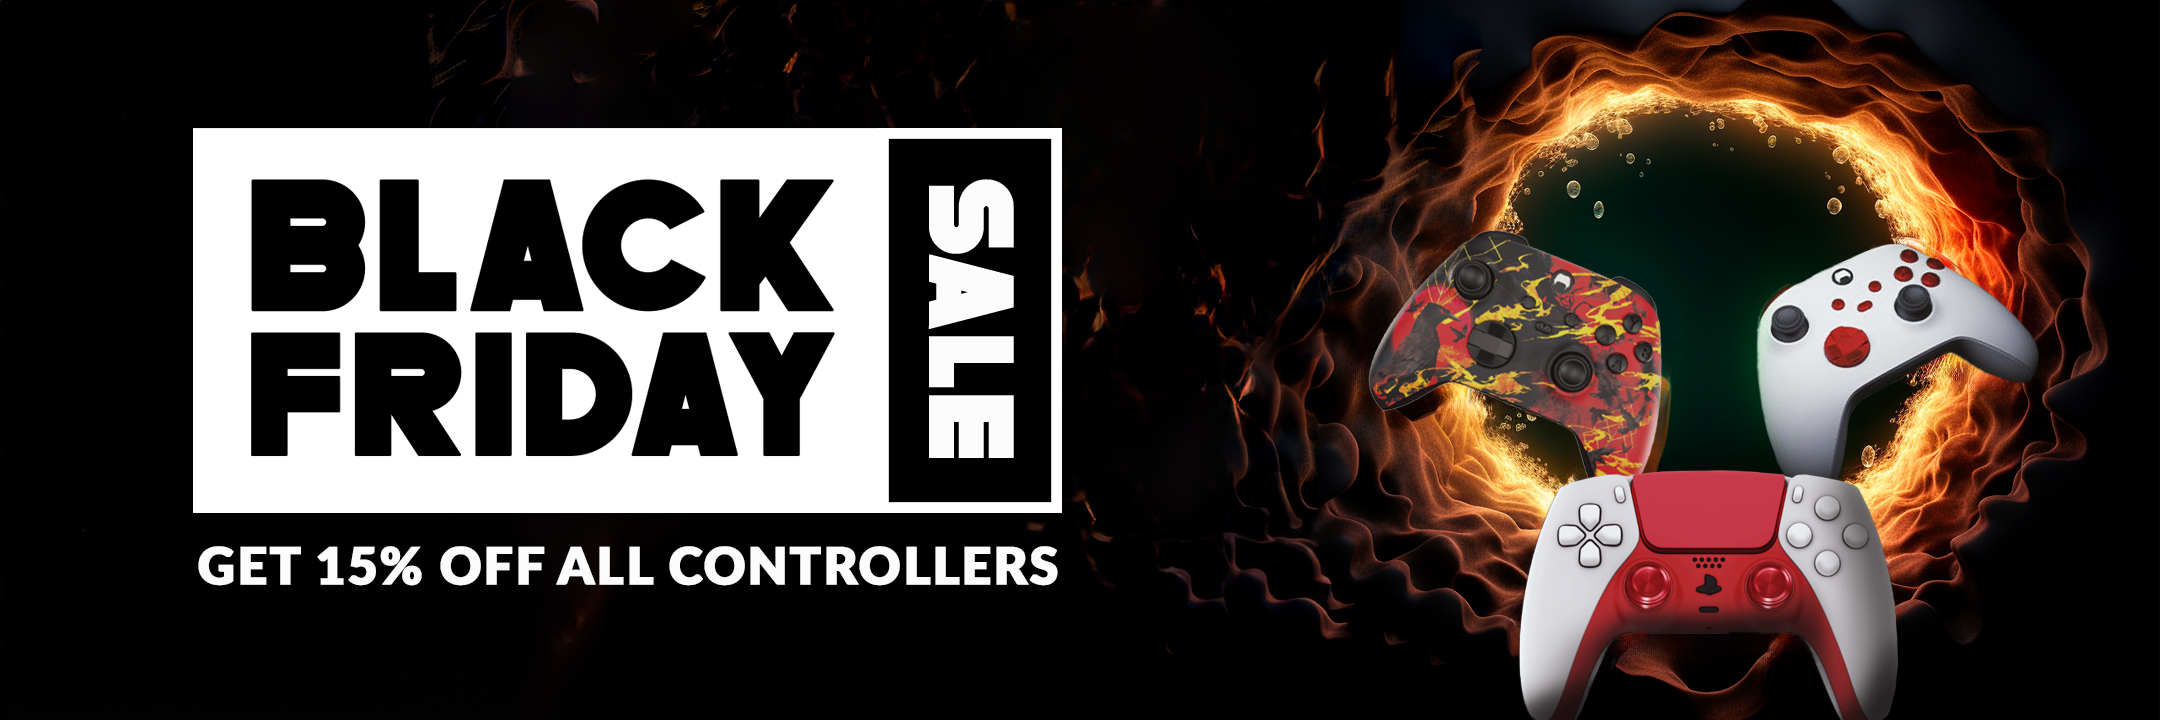 Black Friday Sale 15% off all controllers banner